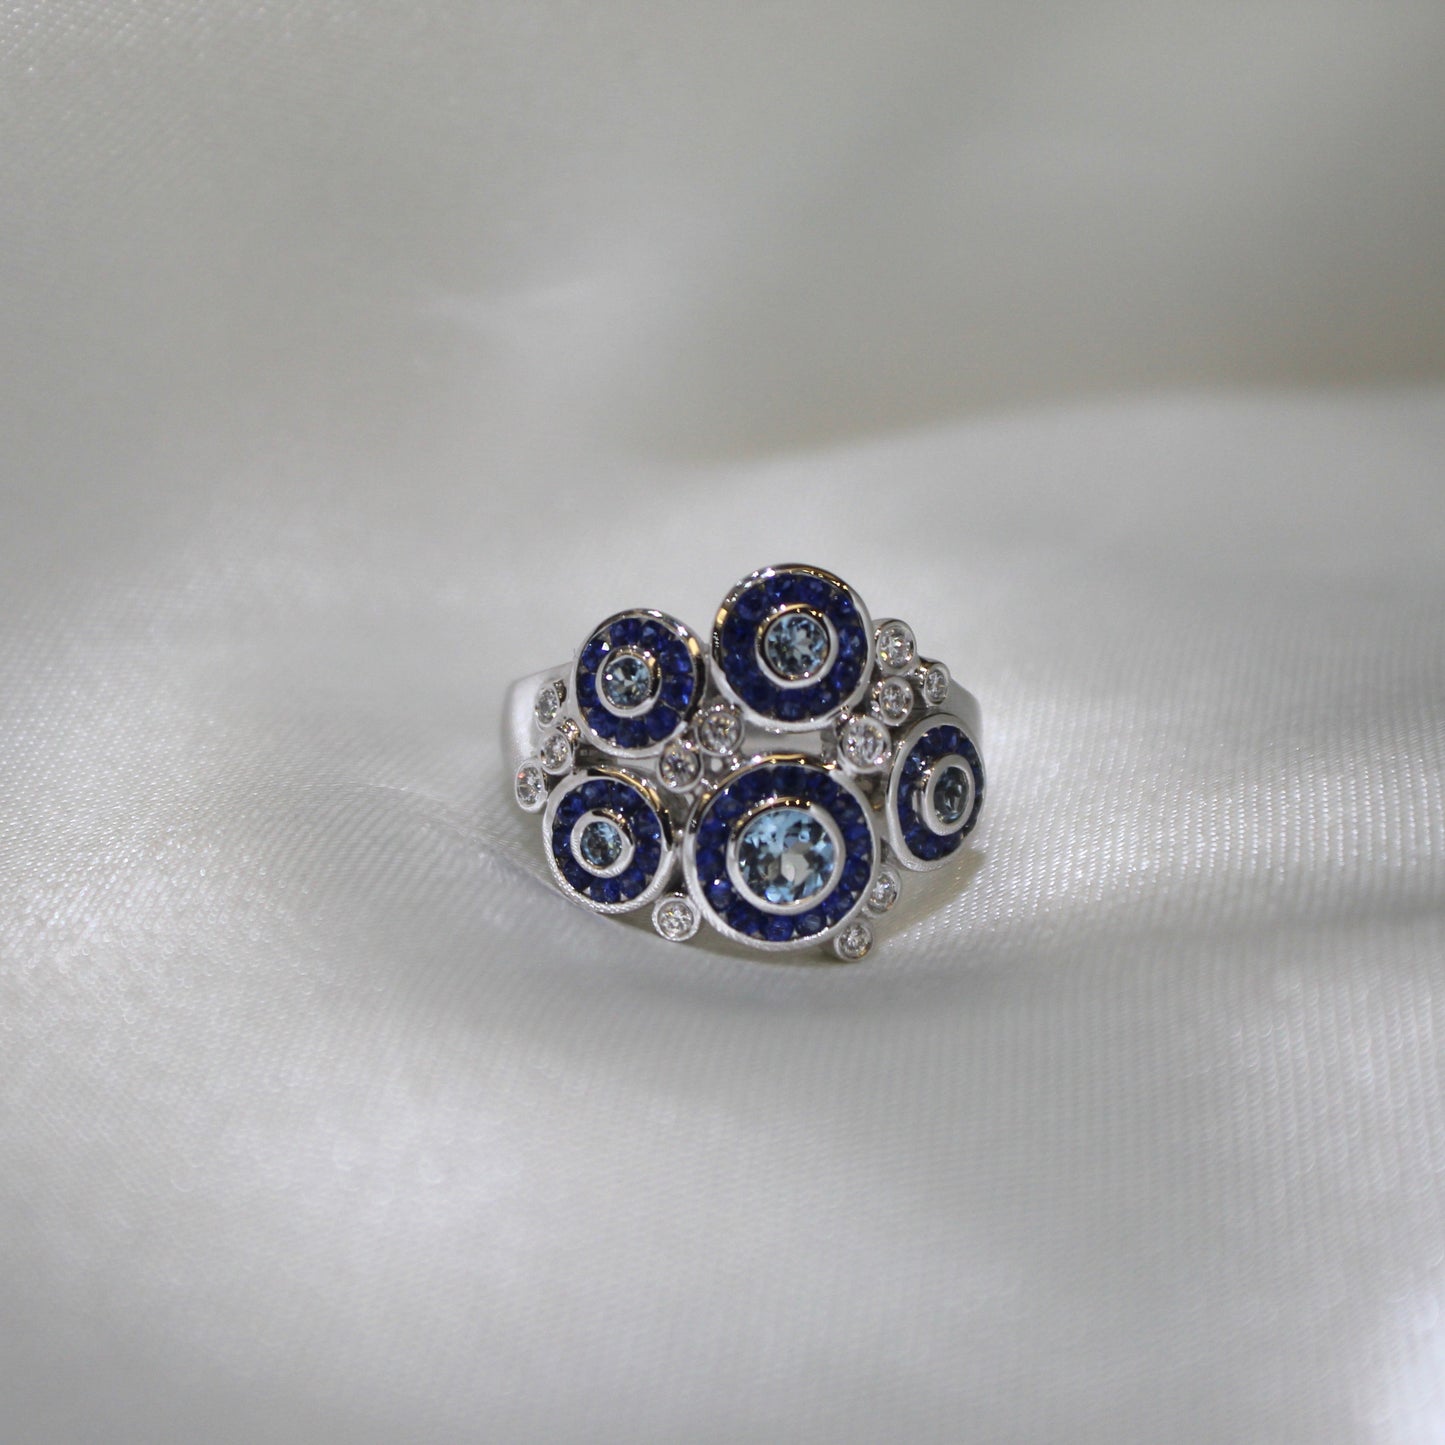 Diamond and Sapphire Cocktail Ring